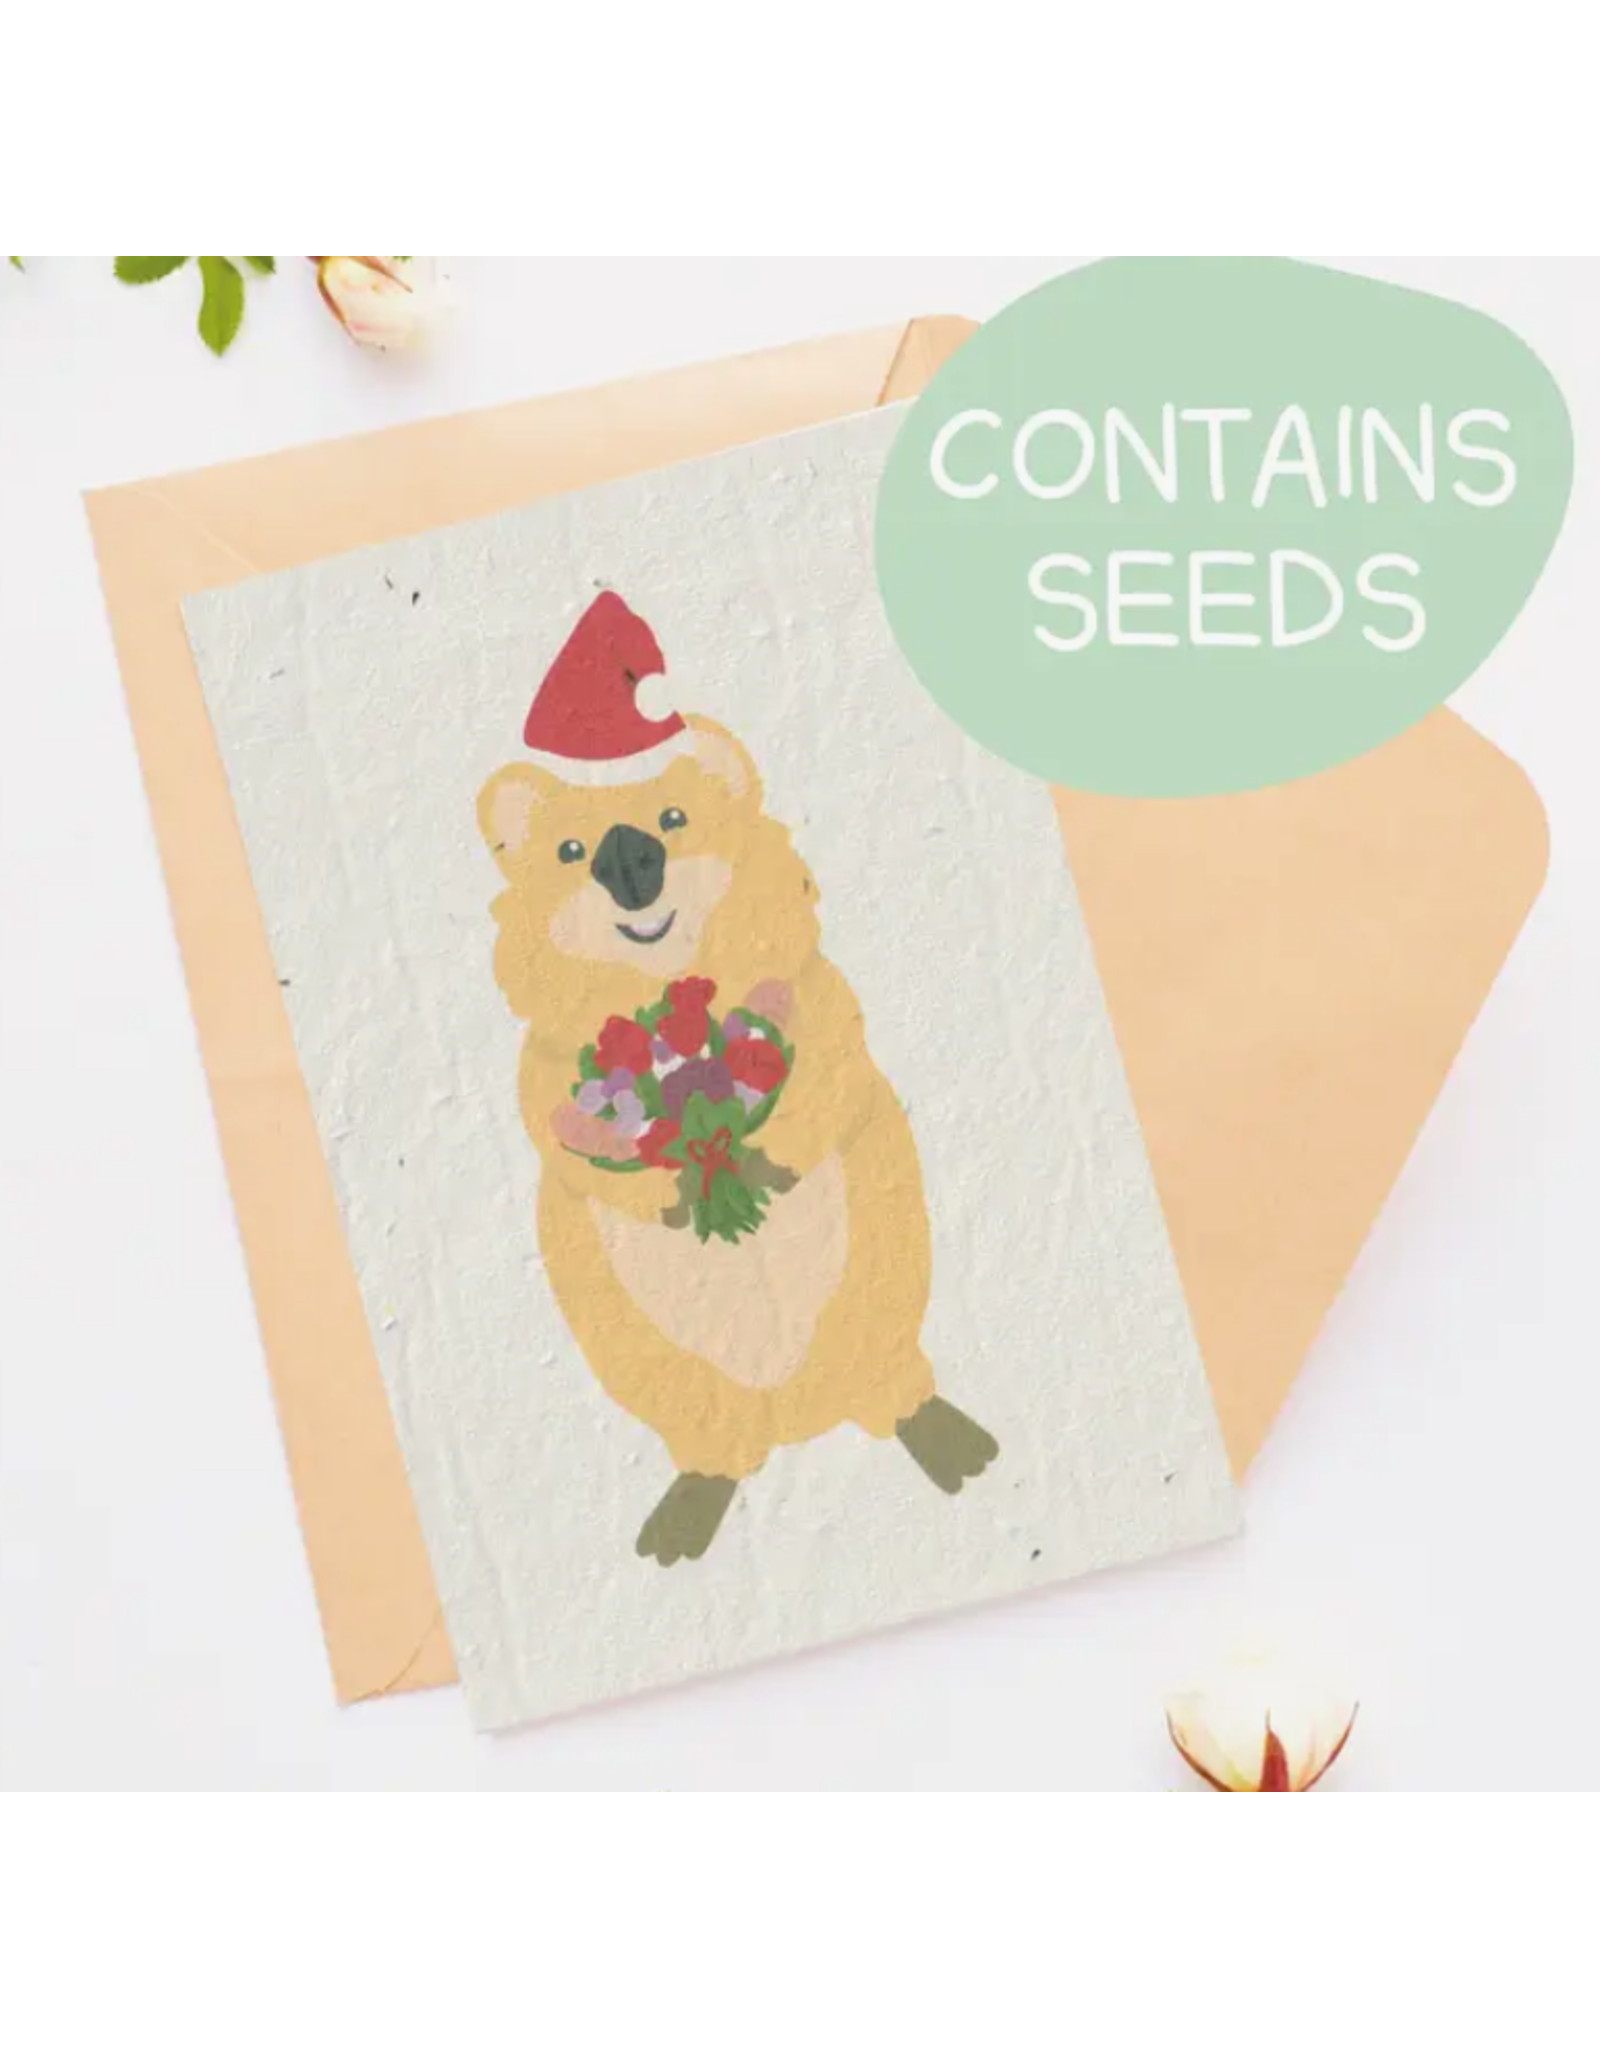 Tilly Scribbles Plantable Christmas Card